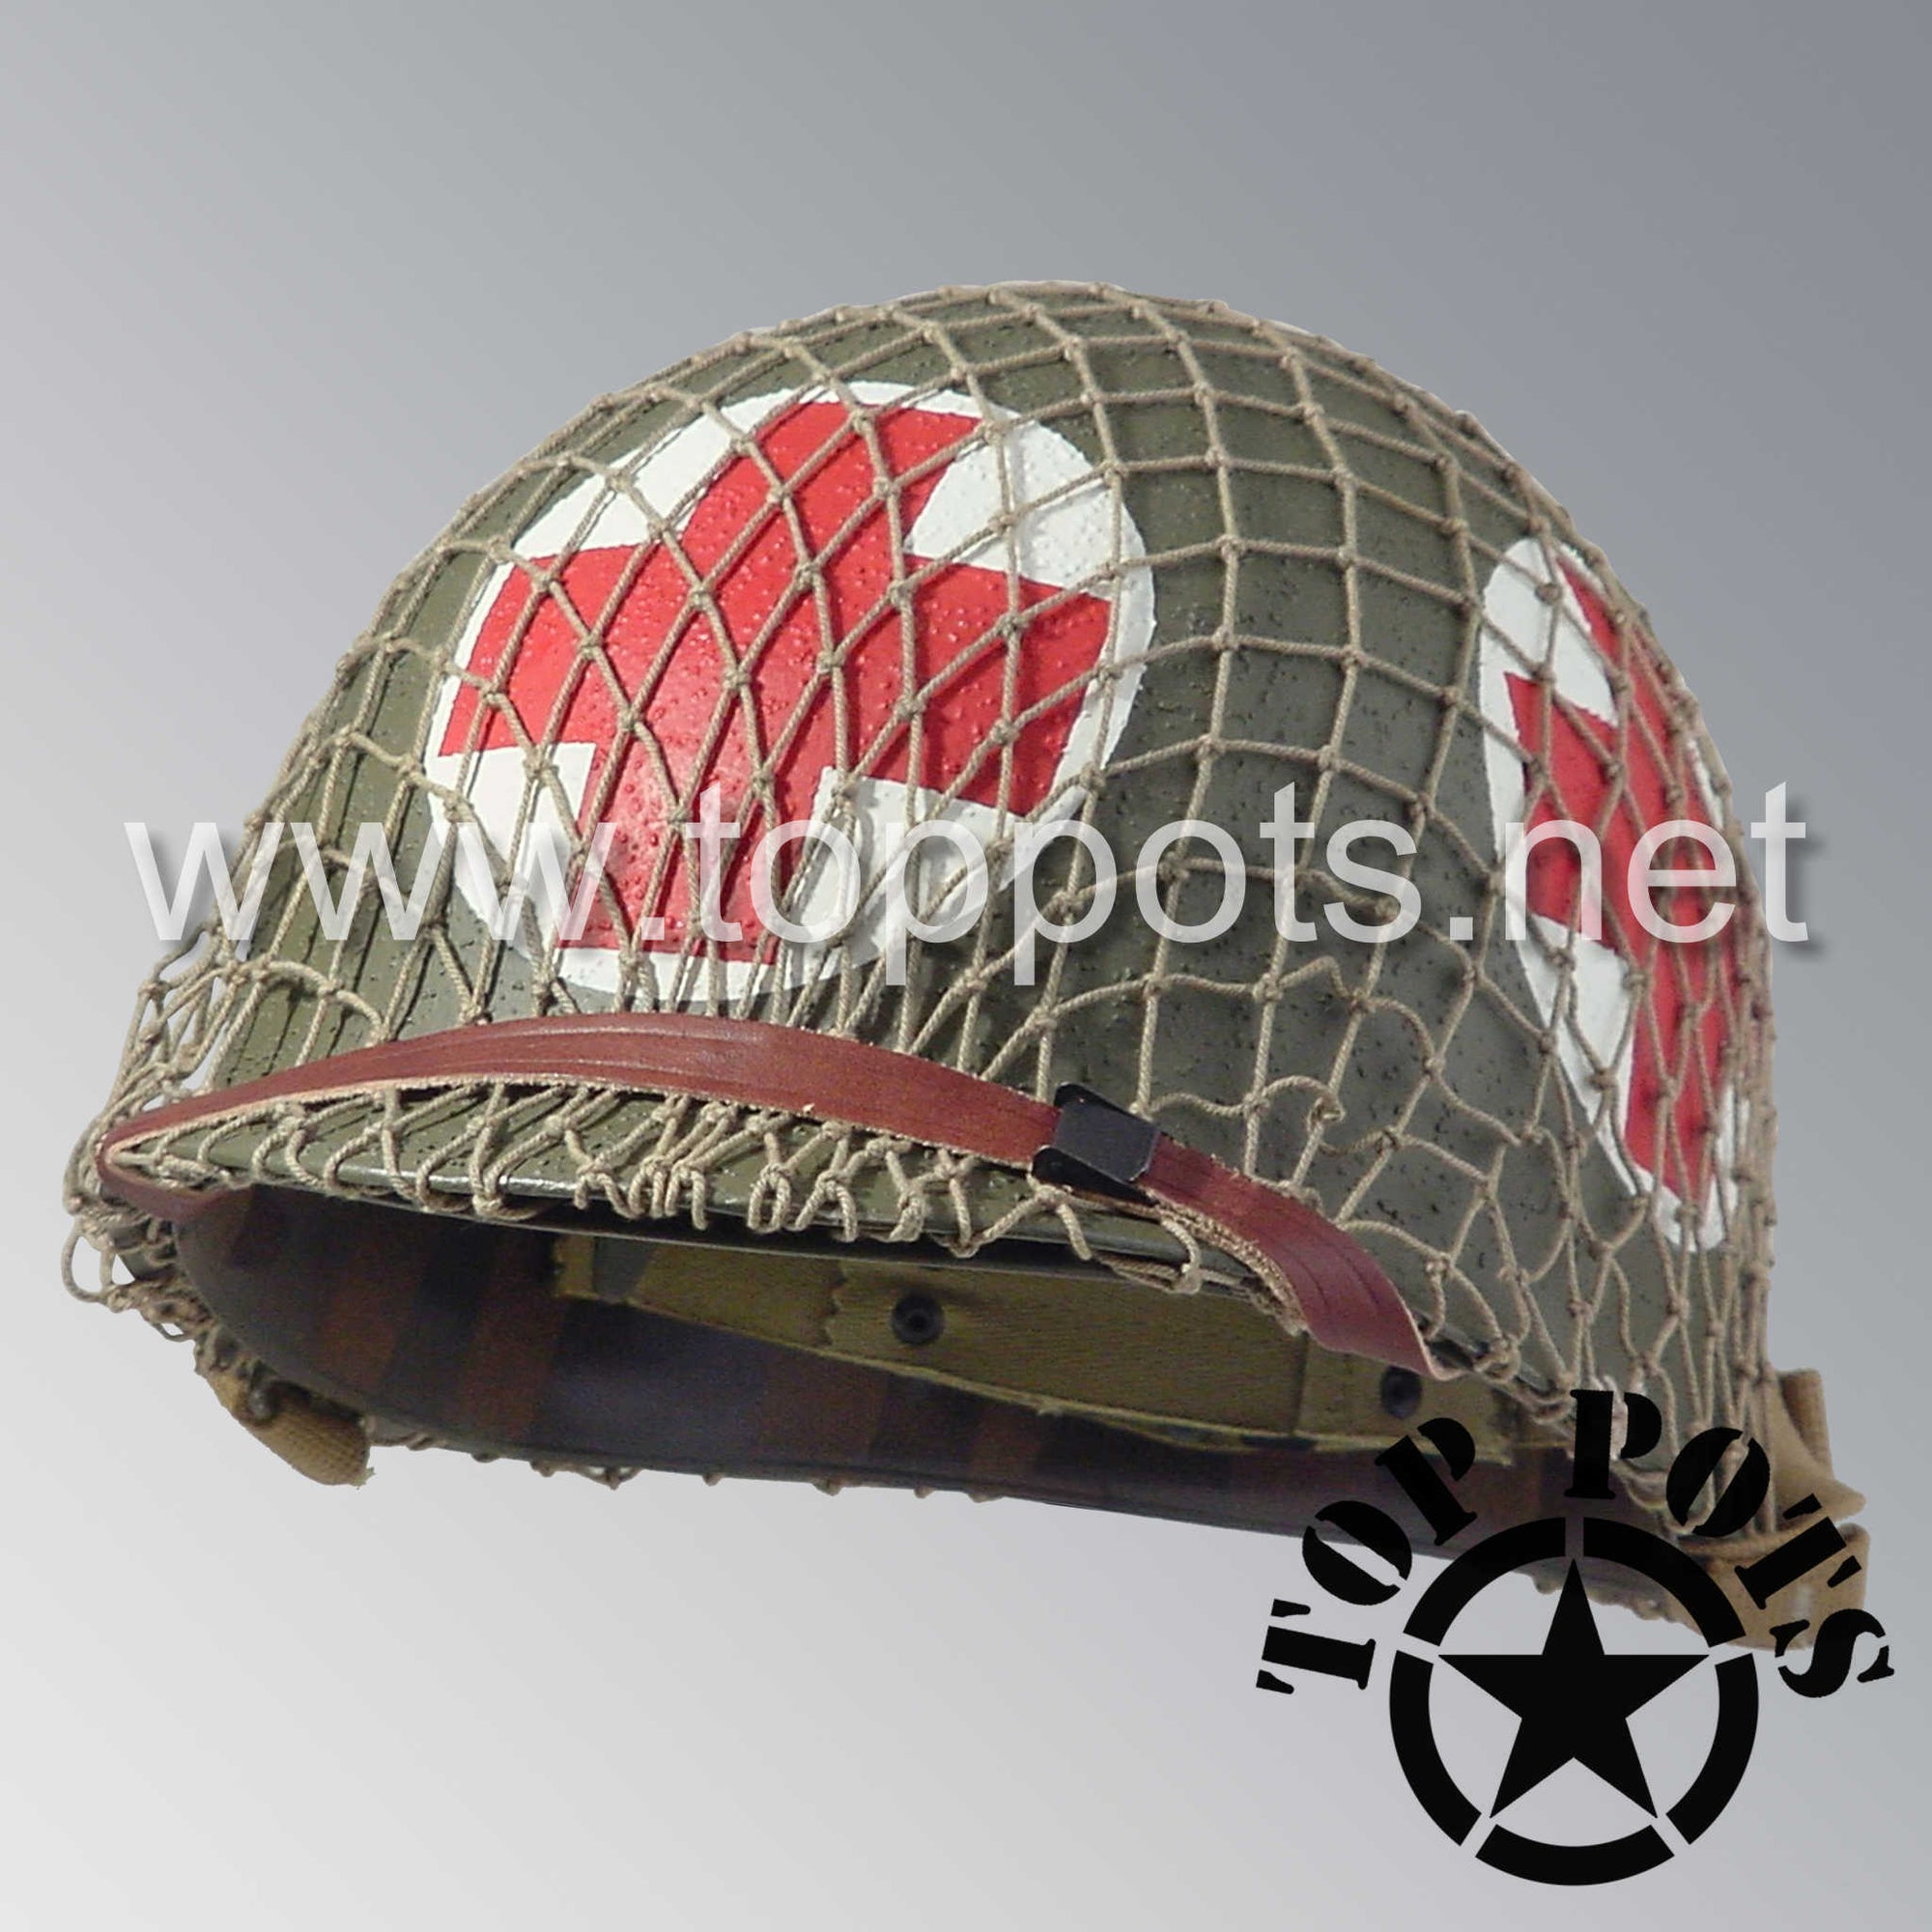 WWII US Army Restored Original M1 Infantry Helmet Swivel Bale Shell and Liner with Four Panel Medic Emblem and Khaki Net